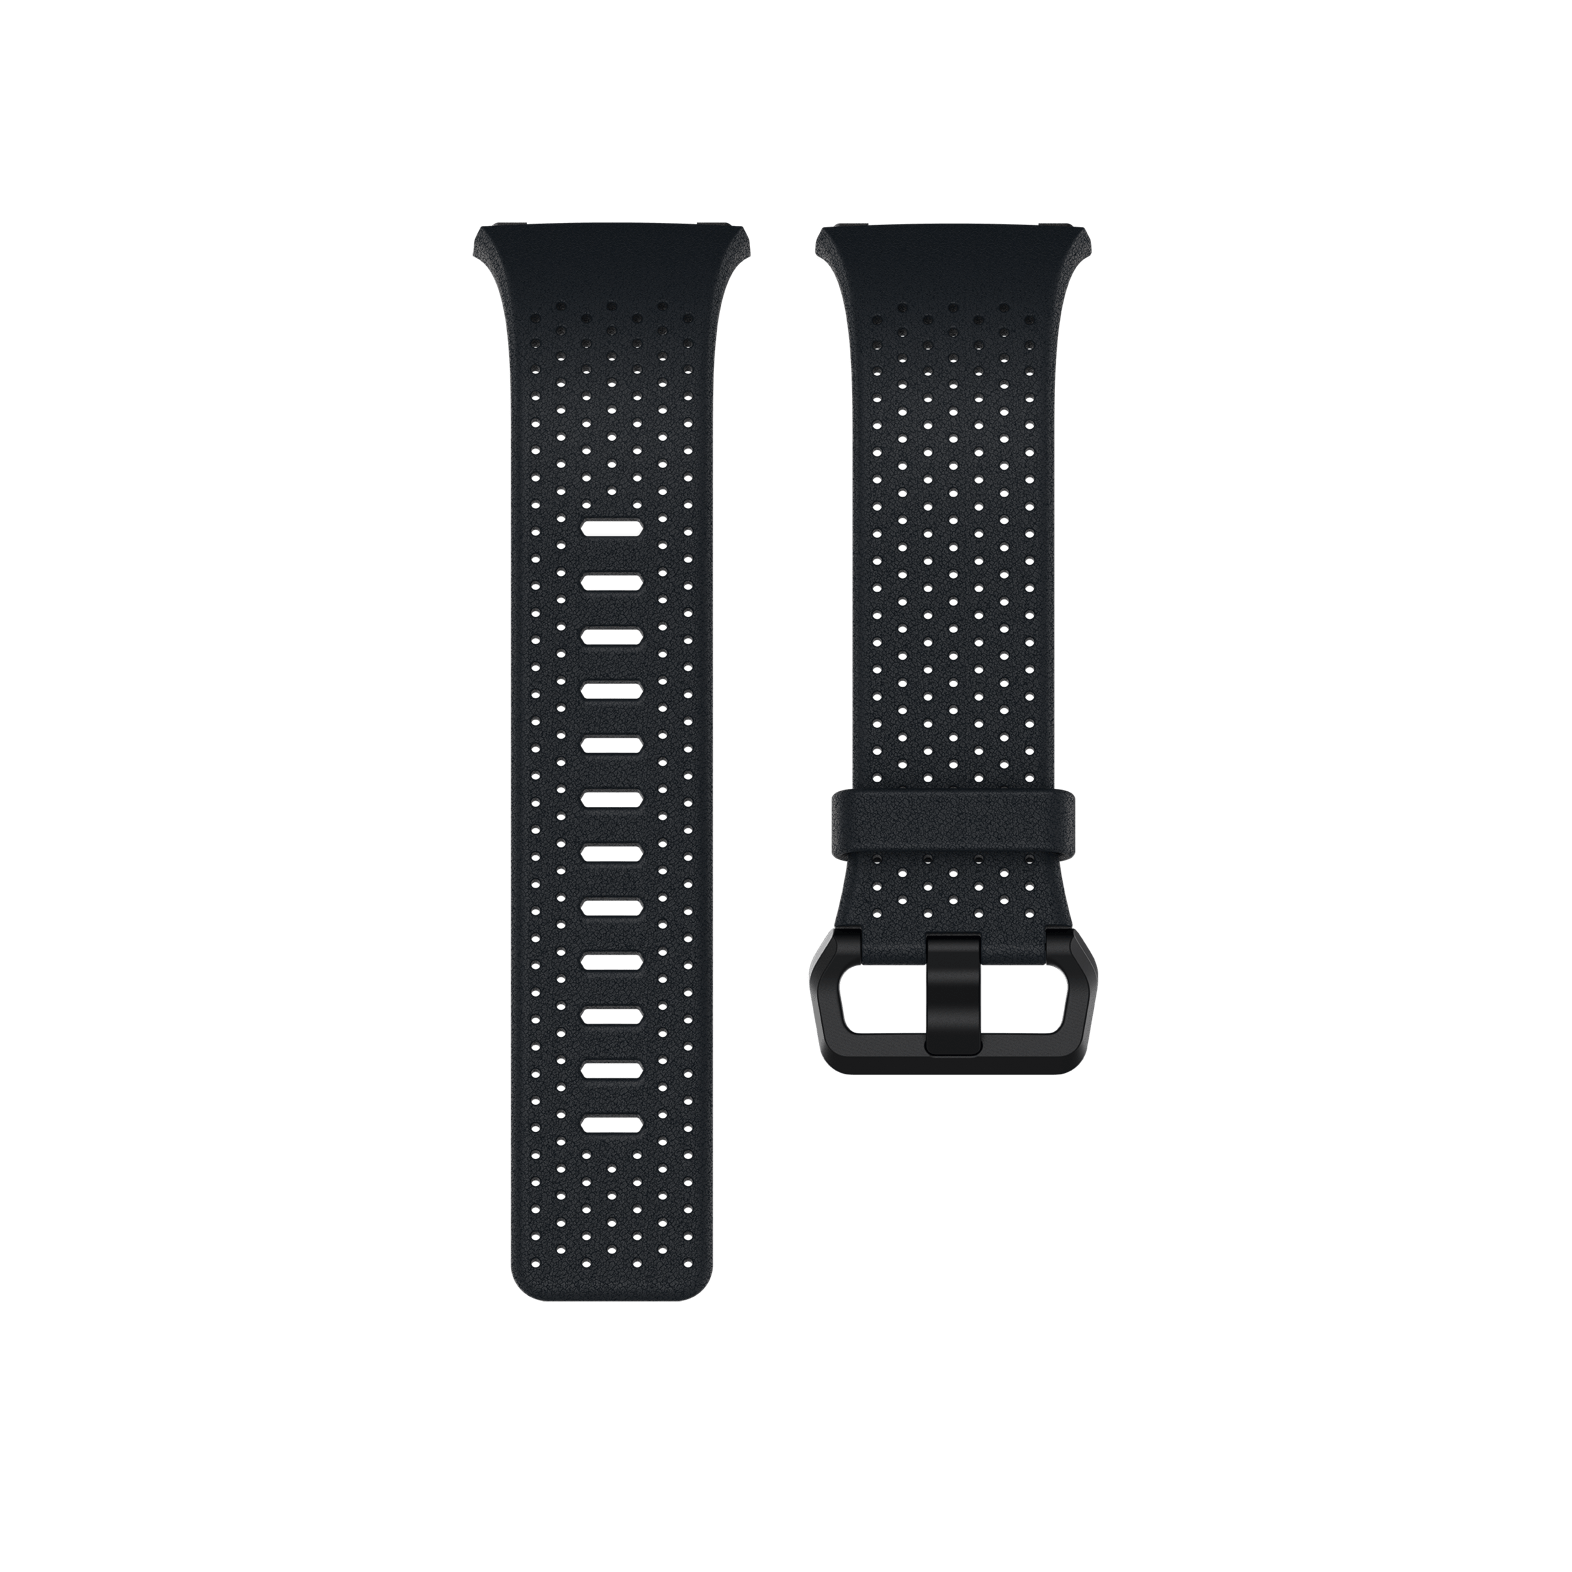 fitbit ionic velcro band